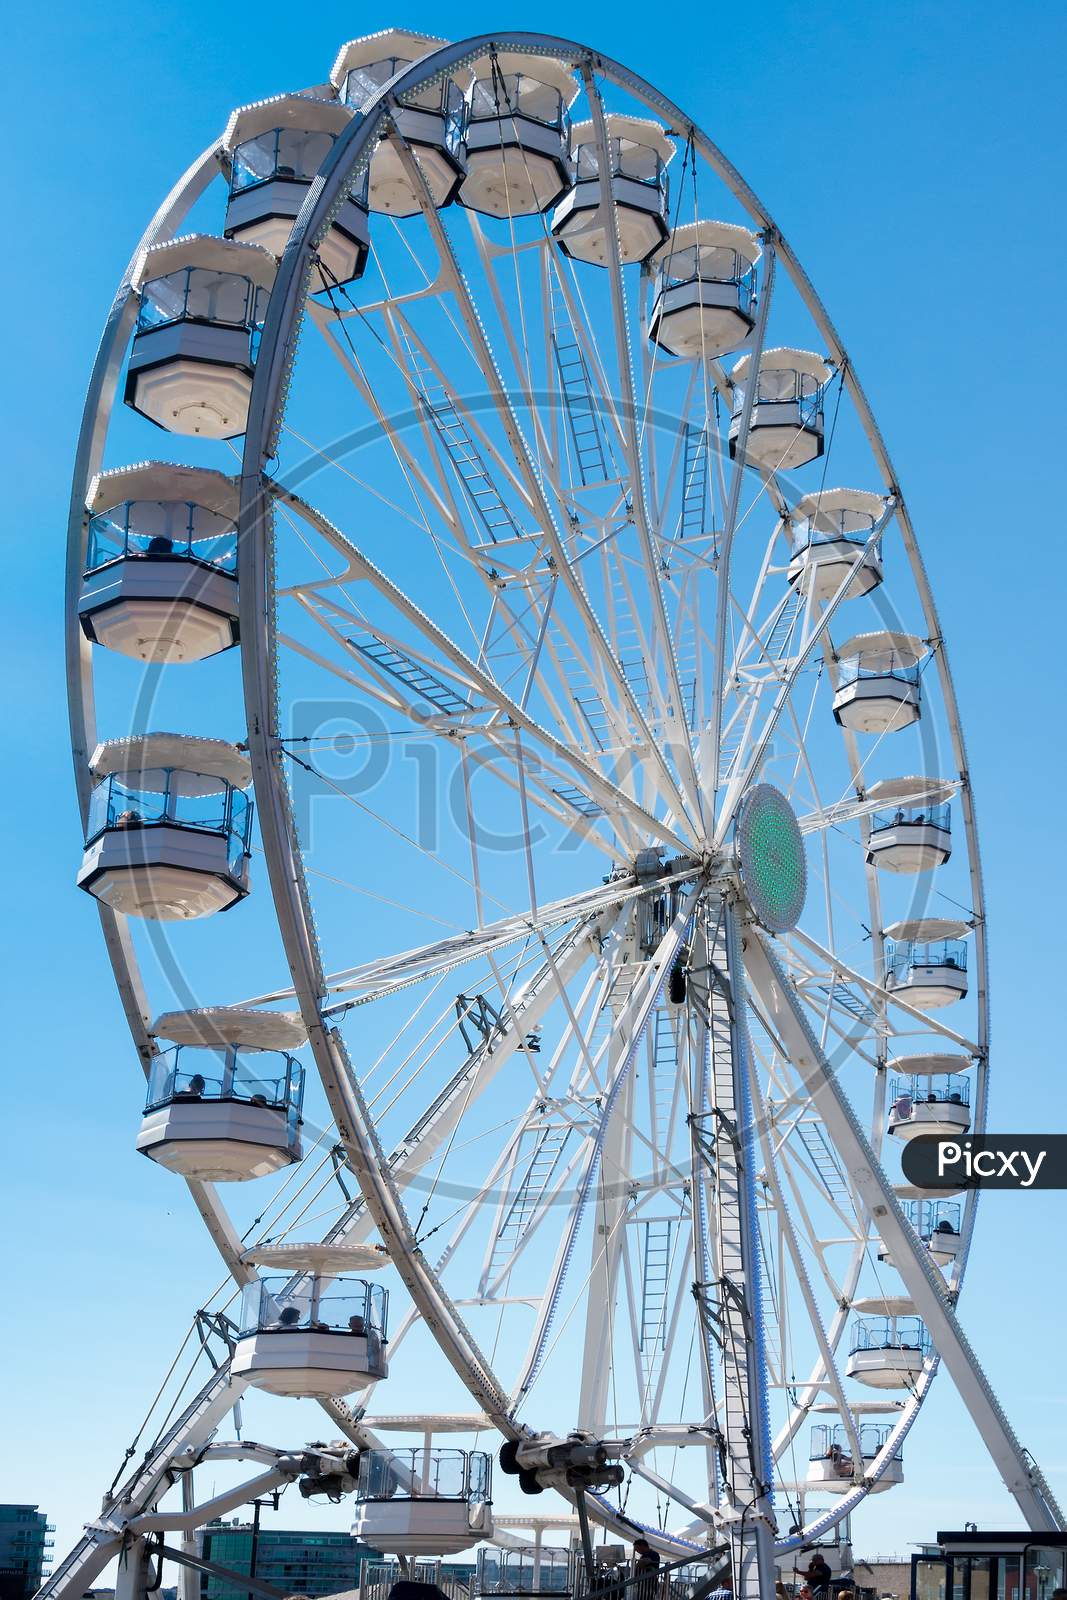 Cardiff/Uk - August 27 : Ferris Wheel In Cardiff On August 27, 2017. Unidentified People